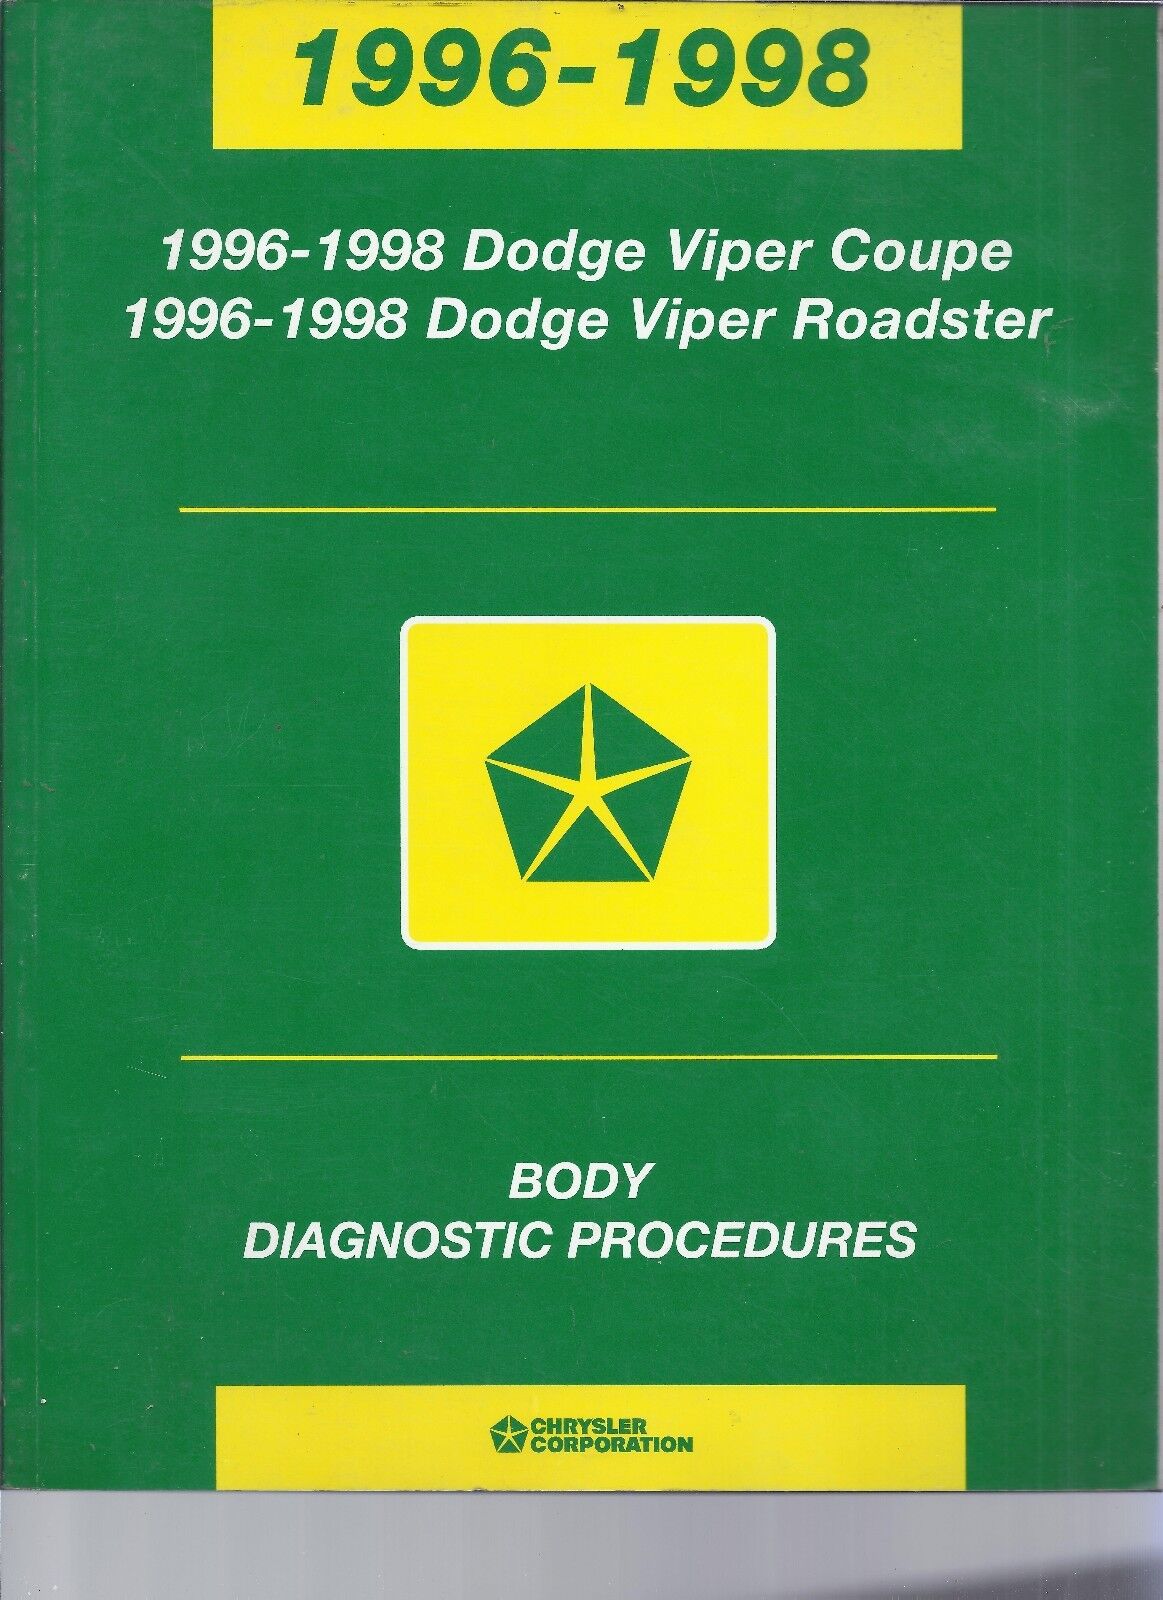 1996-1998 DODGE  VIPER COUPE AND ROADSTER BODY DIAGNOSTIC PROCEDURES  MANUAL